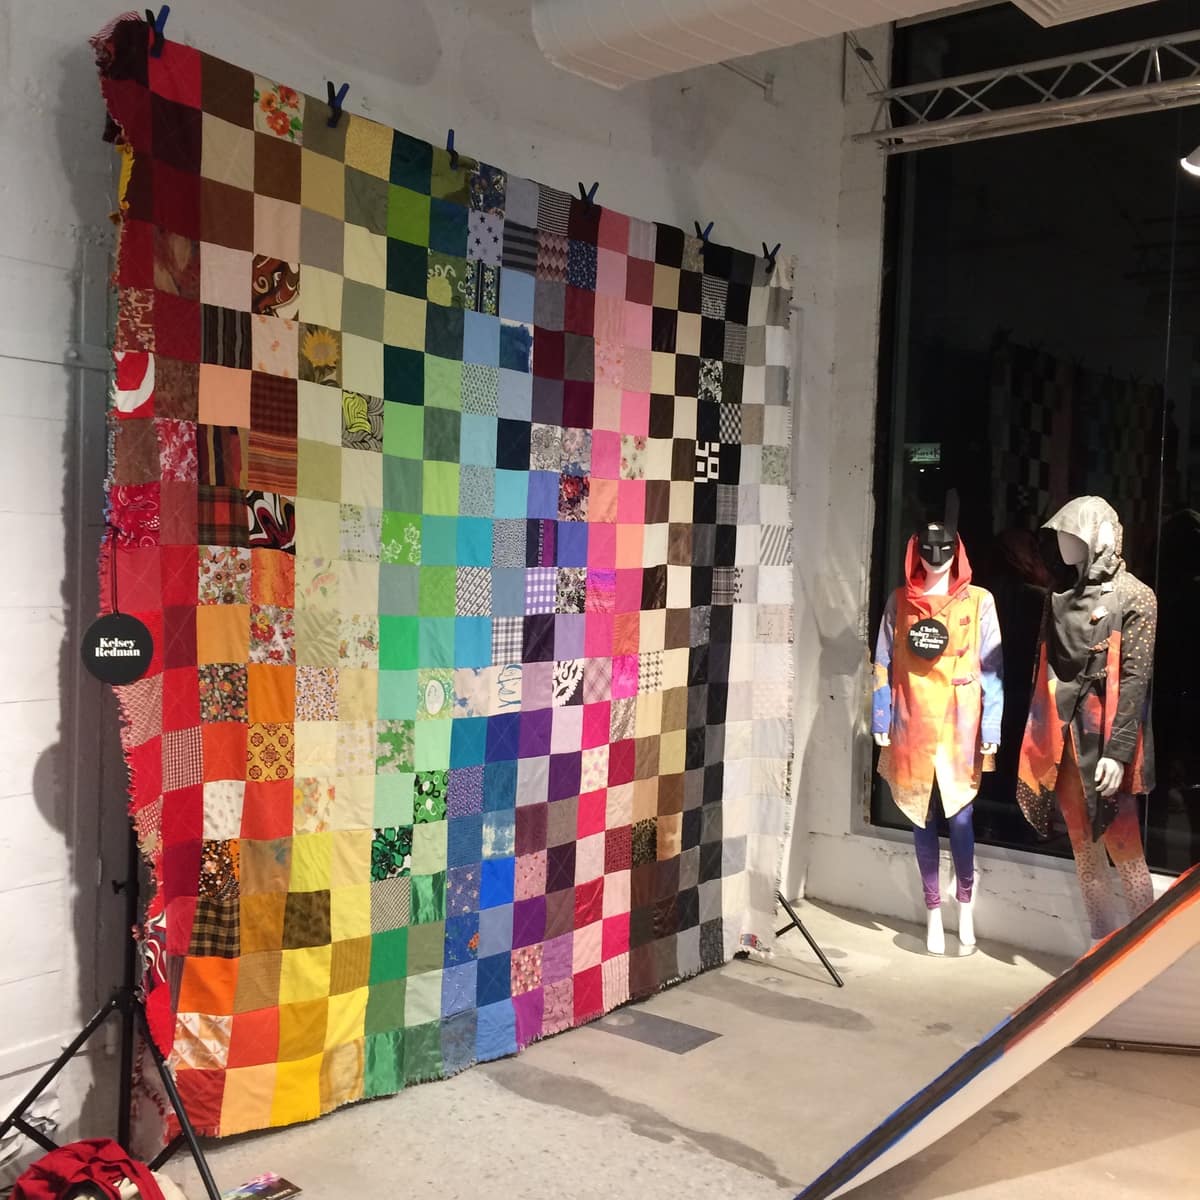 image description: a large, multicoloured quilt, hung on a wall in a gallery